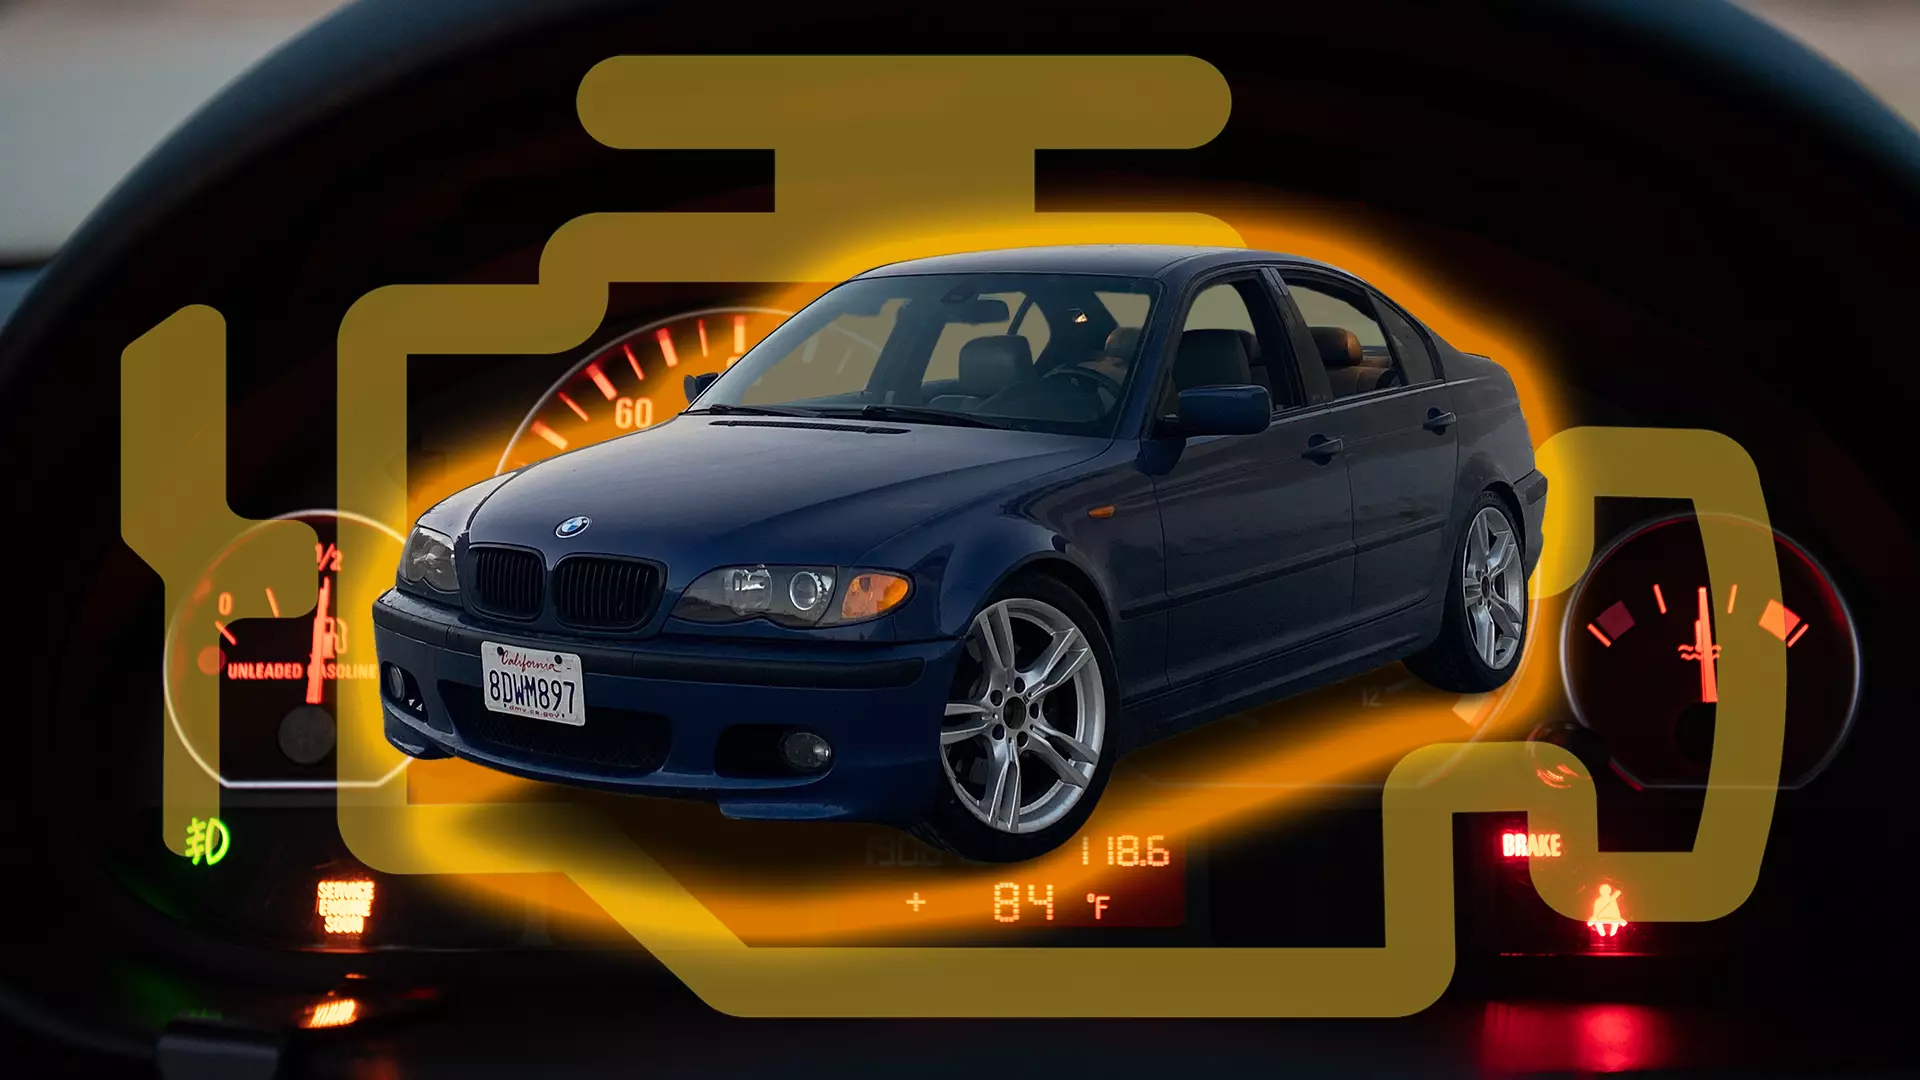 Everything That Could Fail, Did: What I Learned Owning A BMW E46 ZHP